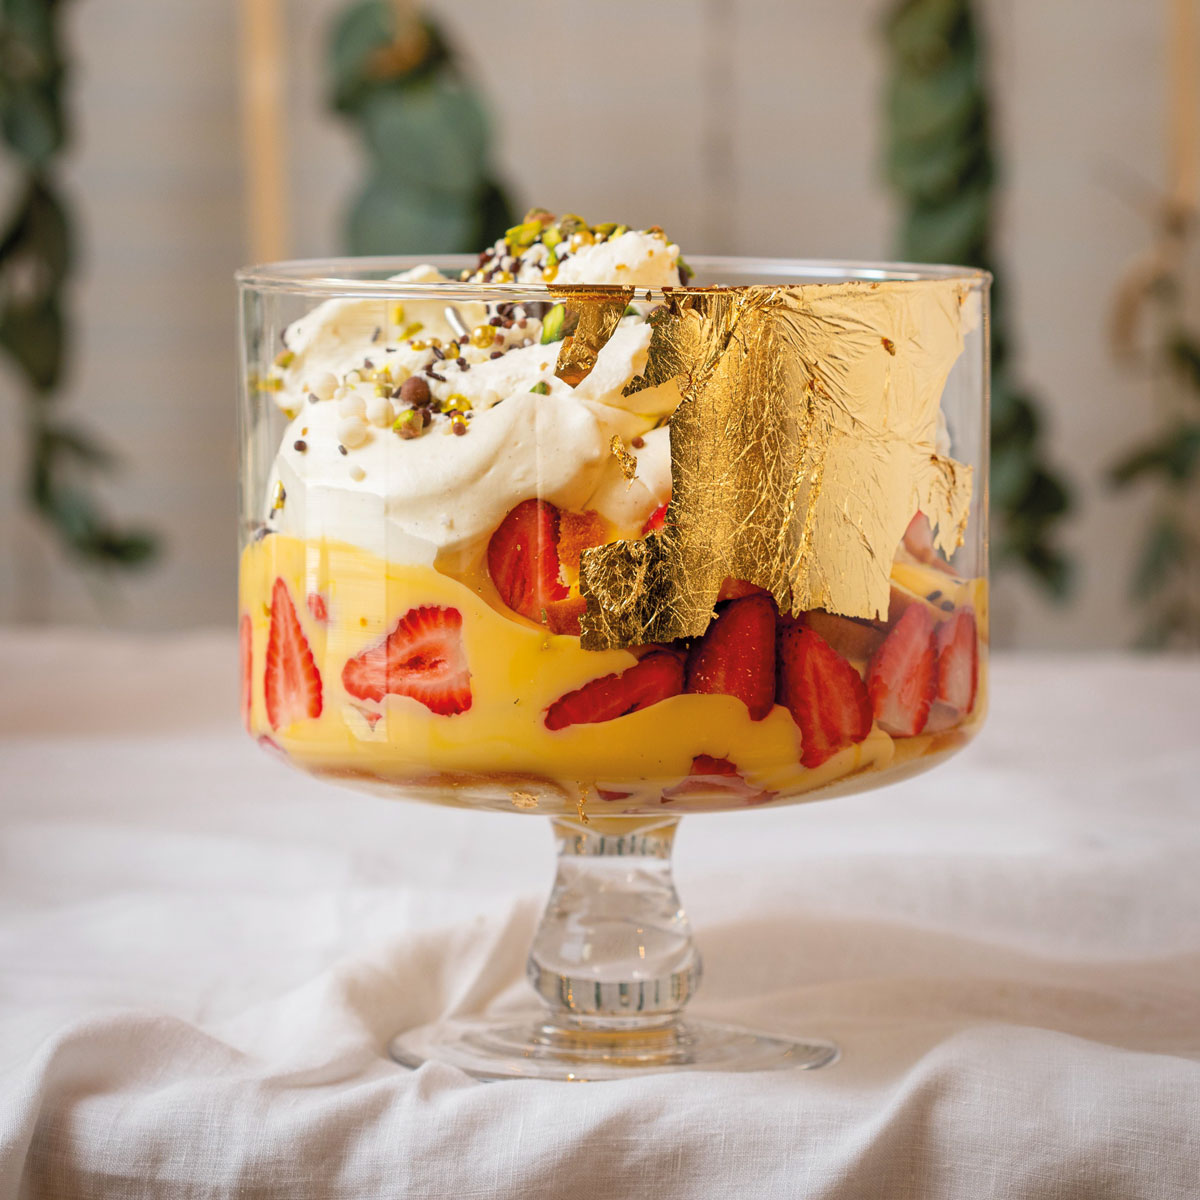 Middle-Eastern inspired trifle